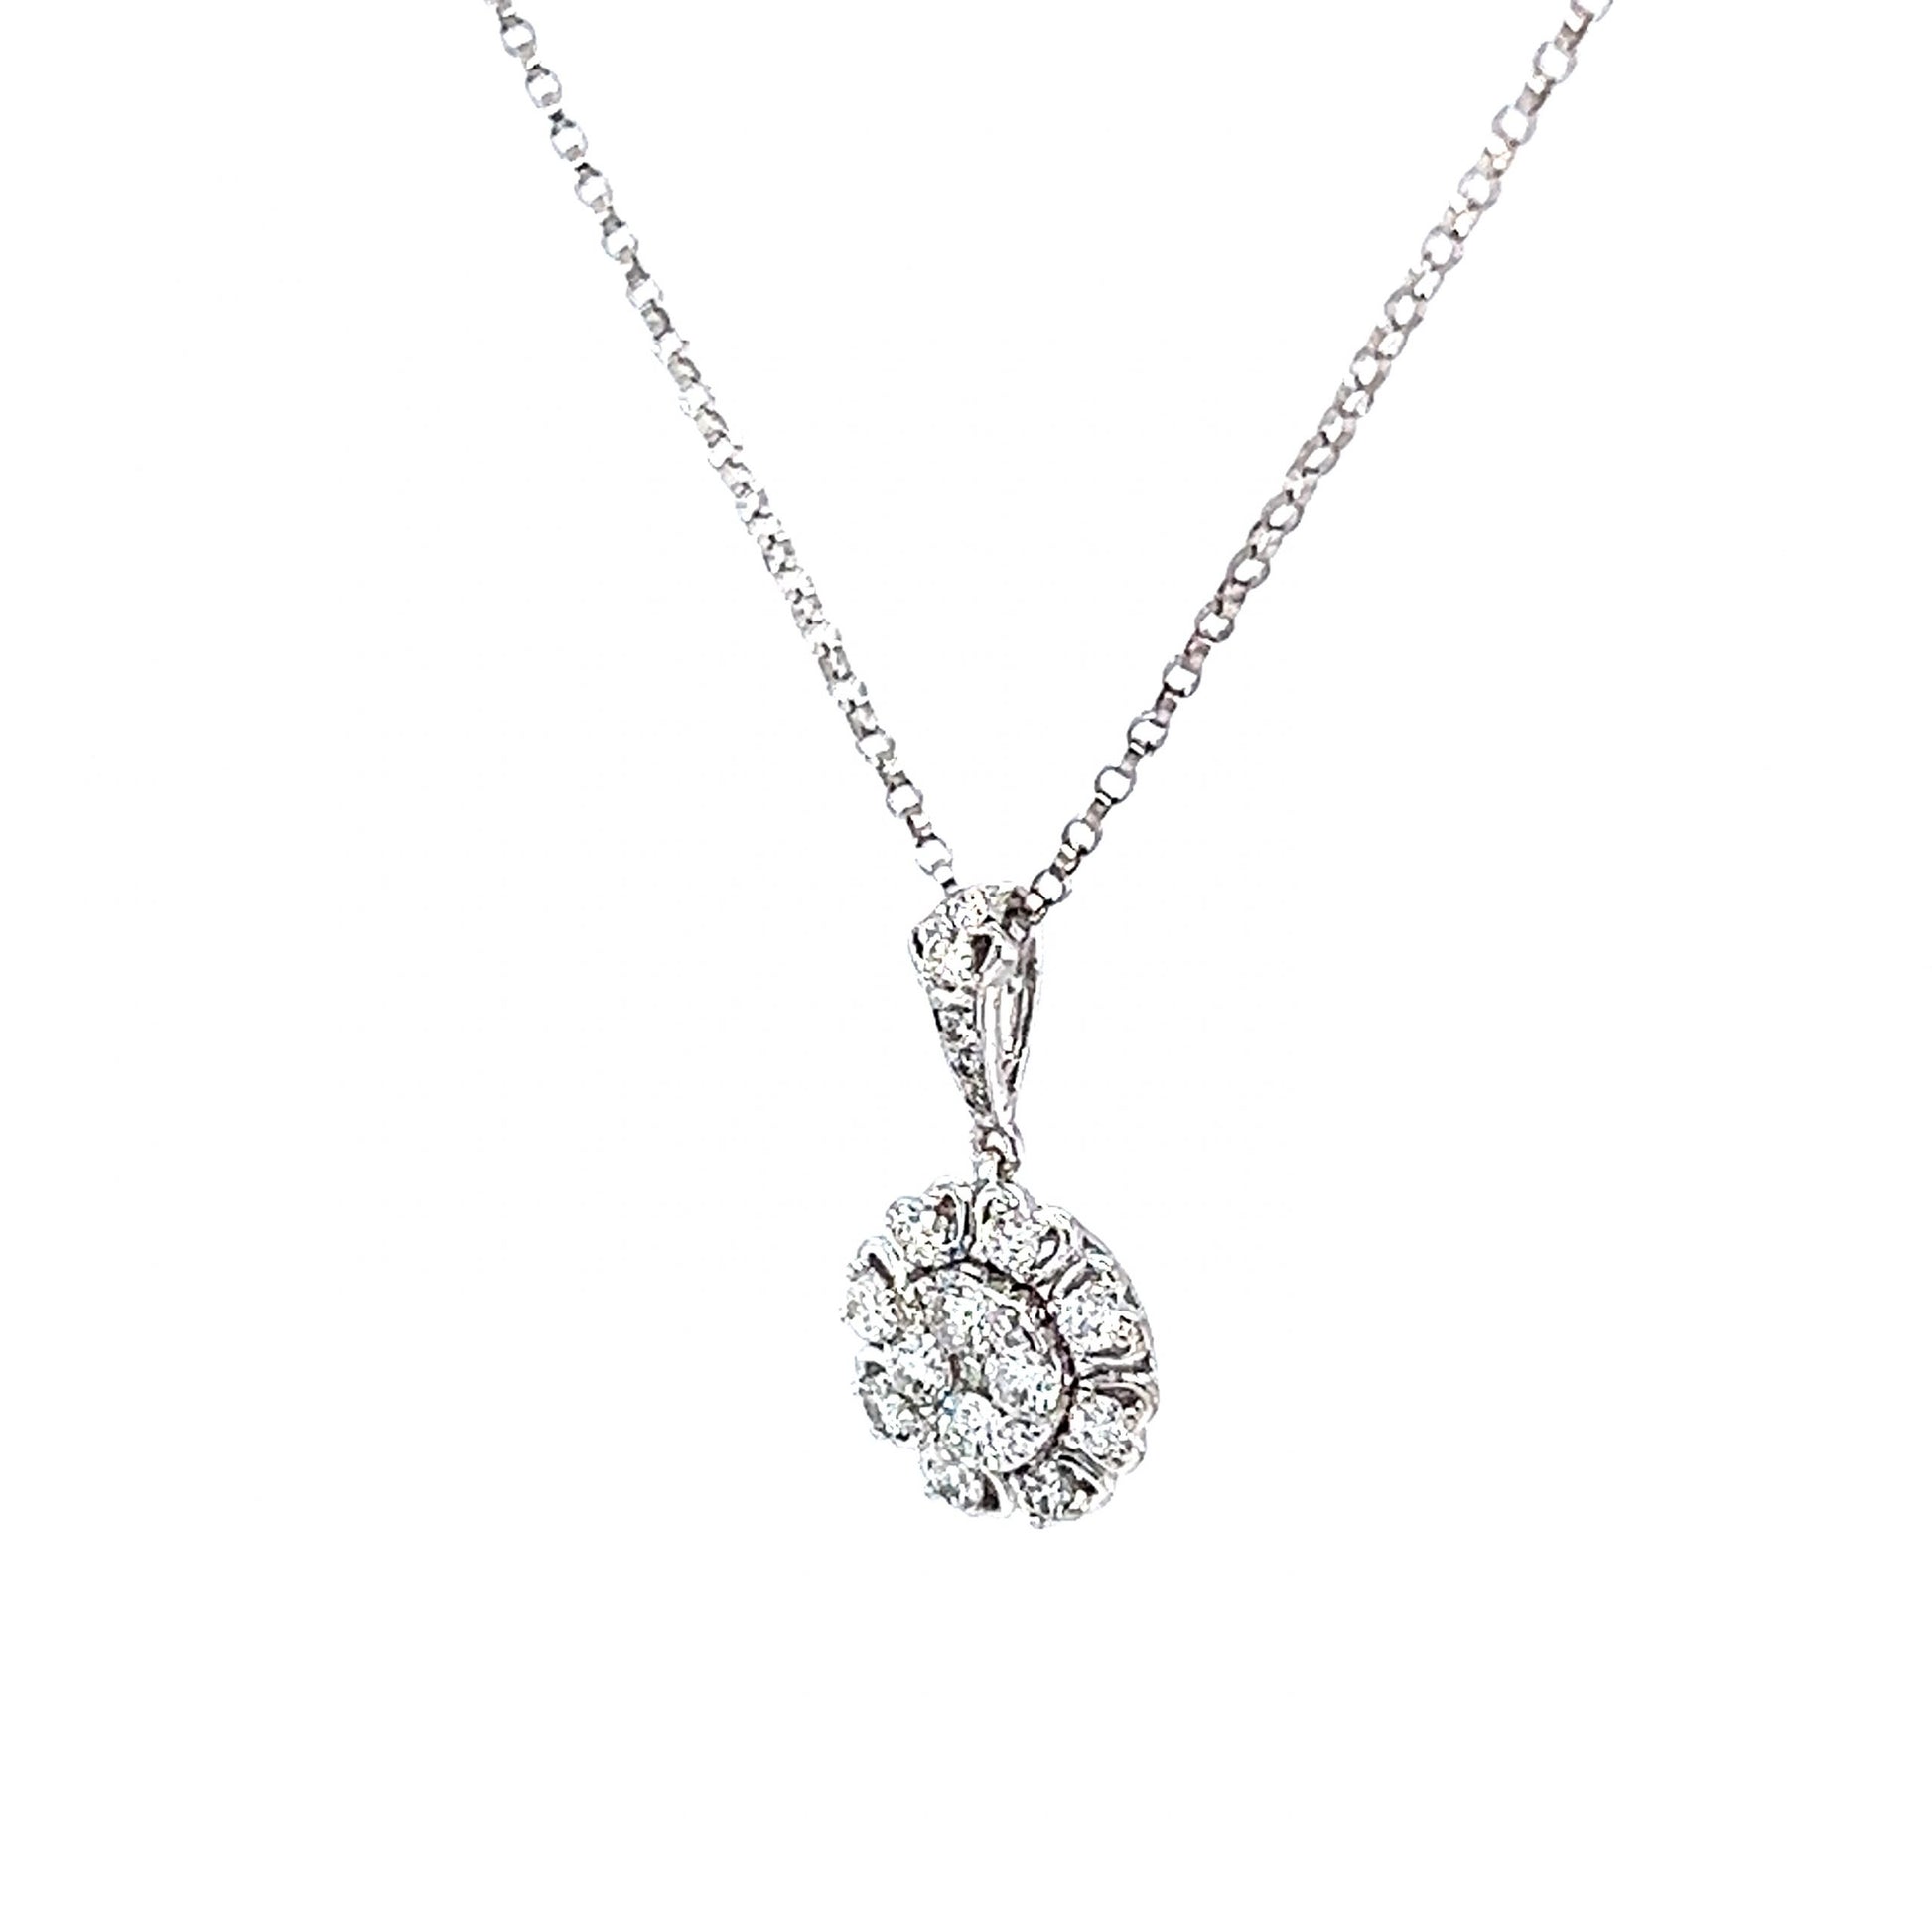 Round Diamond Halo Cluster Pendant Necklace in 14k White Gold